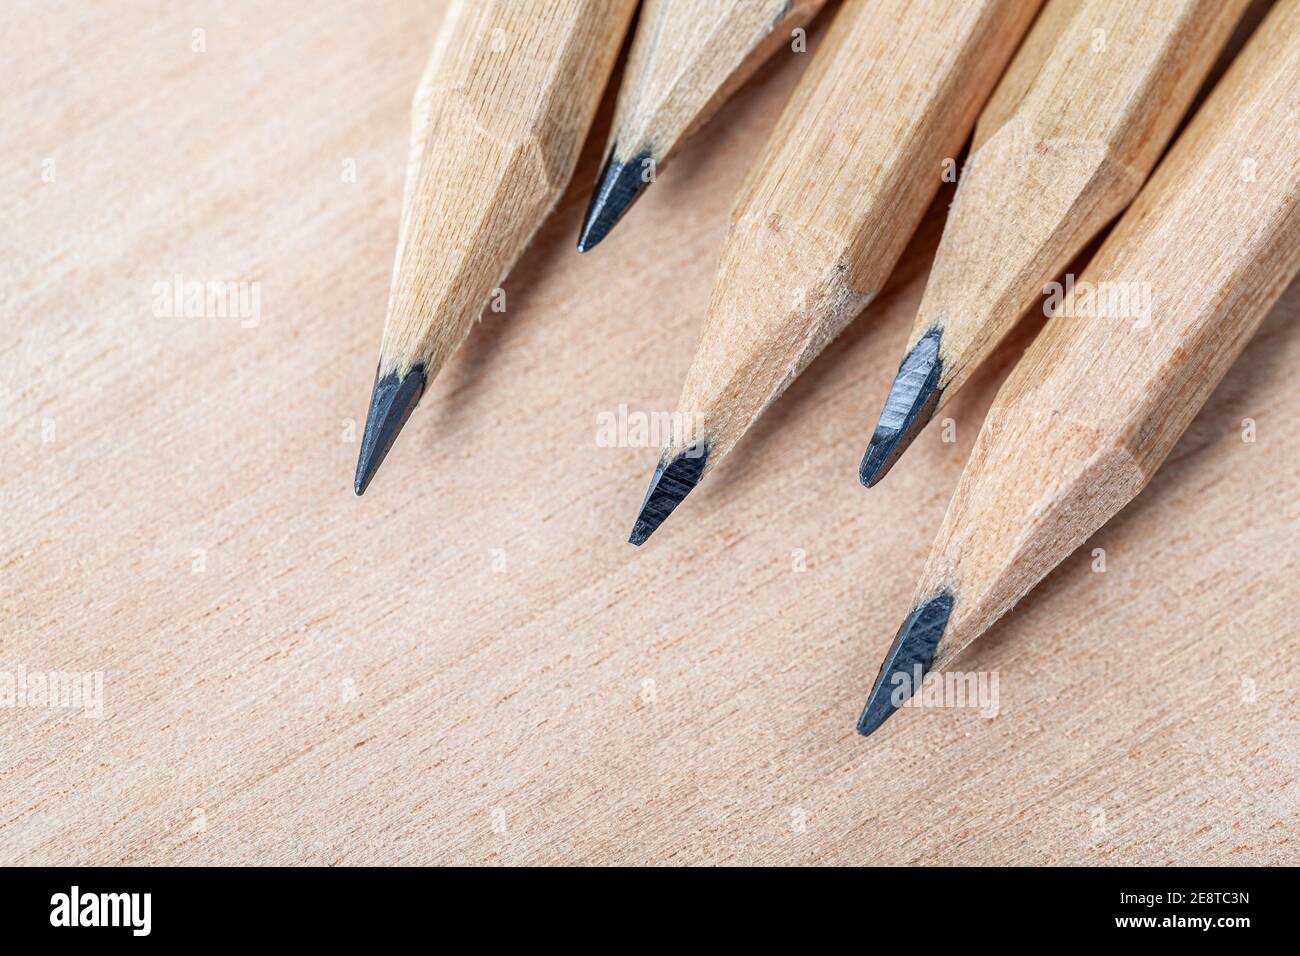 Sharpened pencils on a wooden background Stock Photo